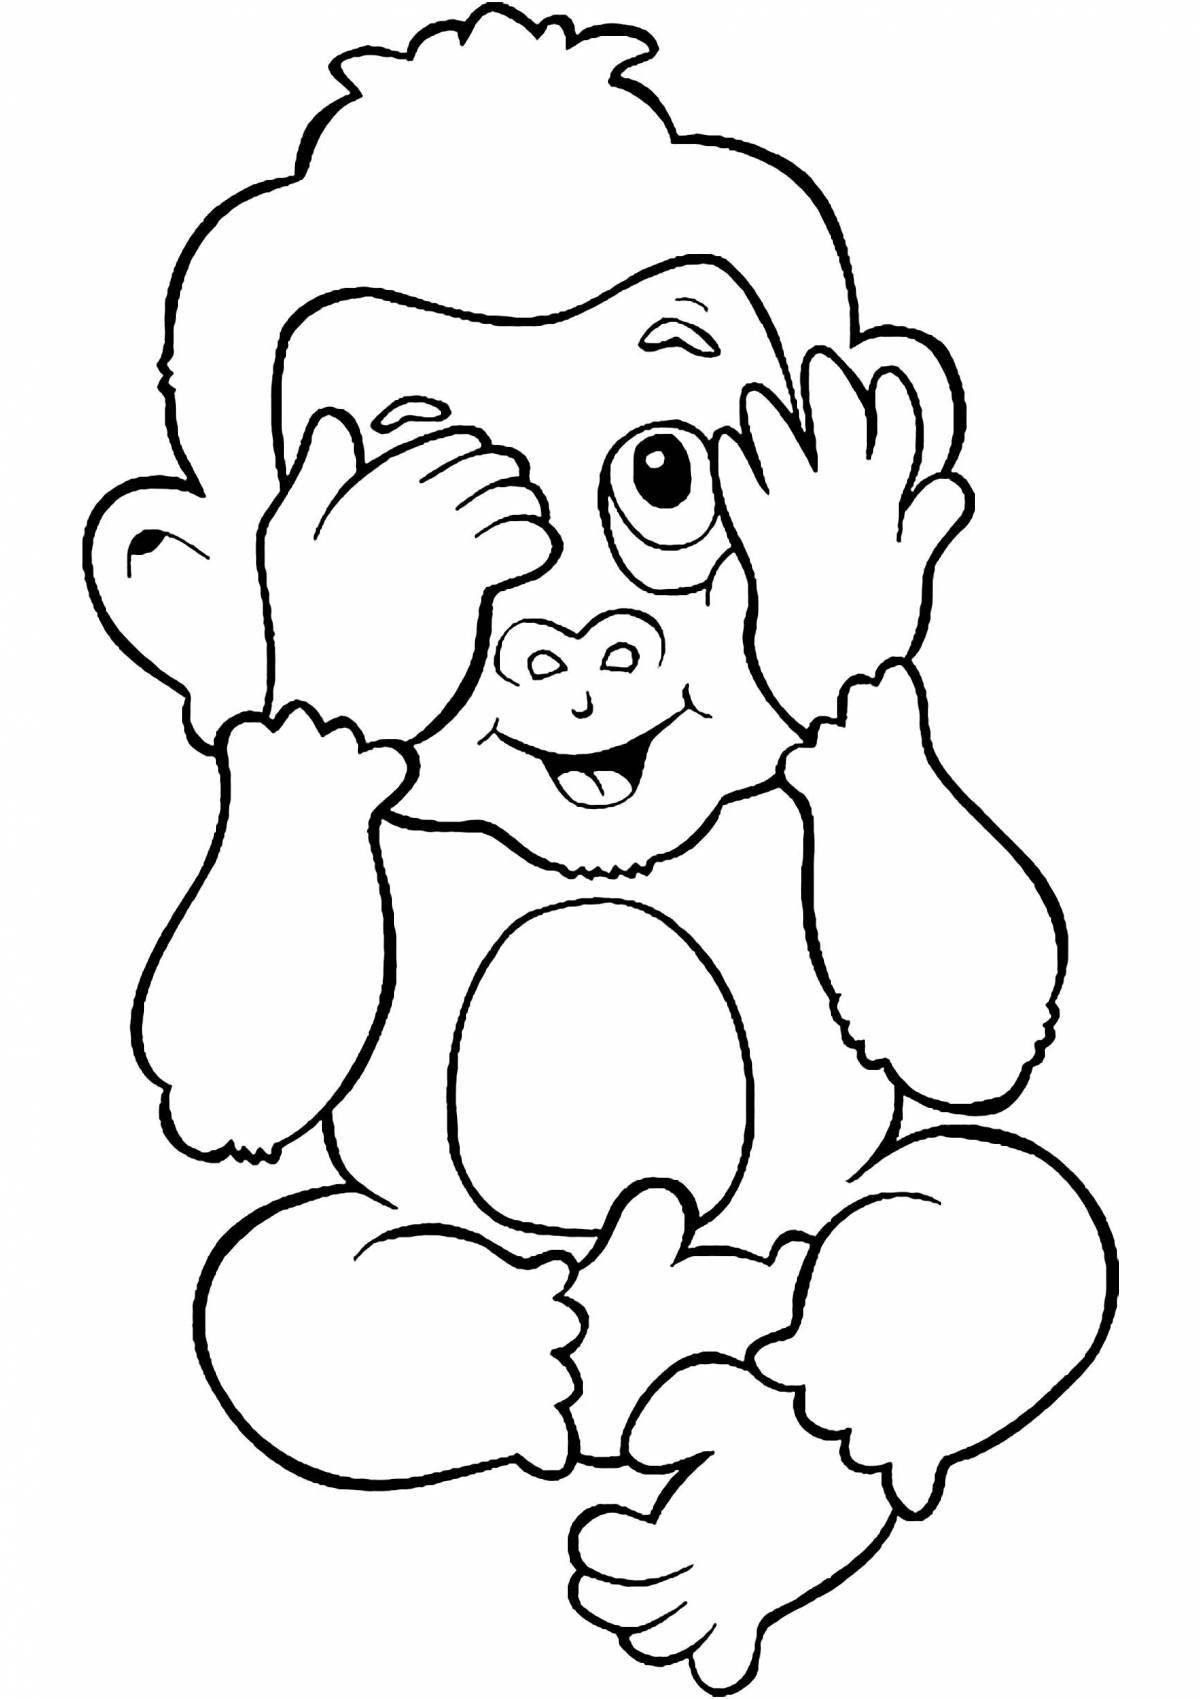 Crazy monkey coloring book for kids